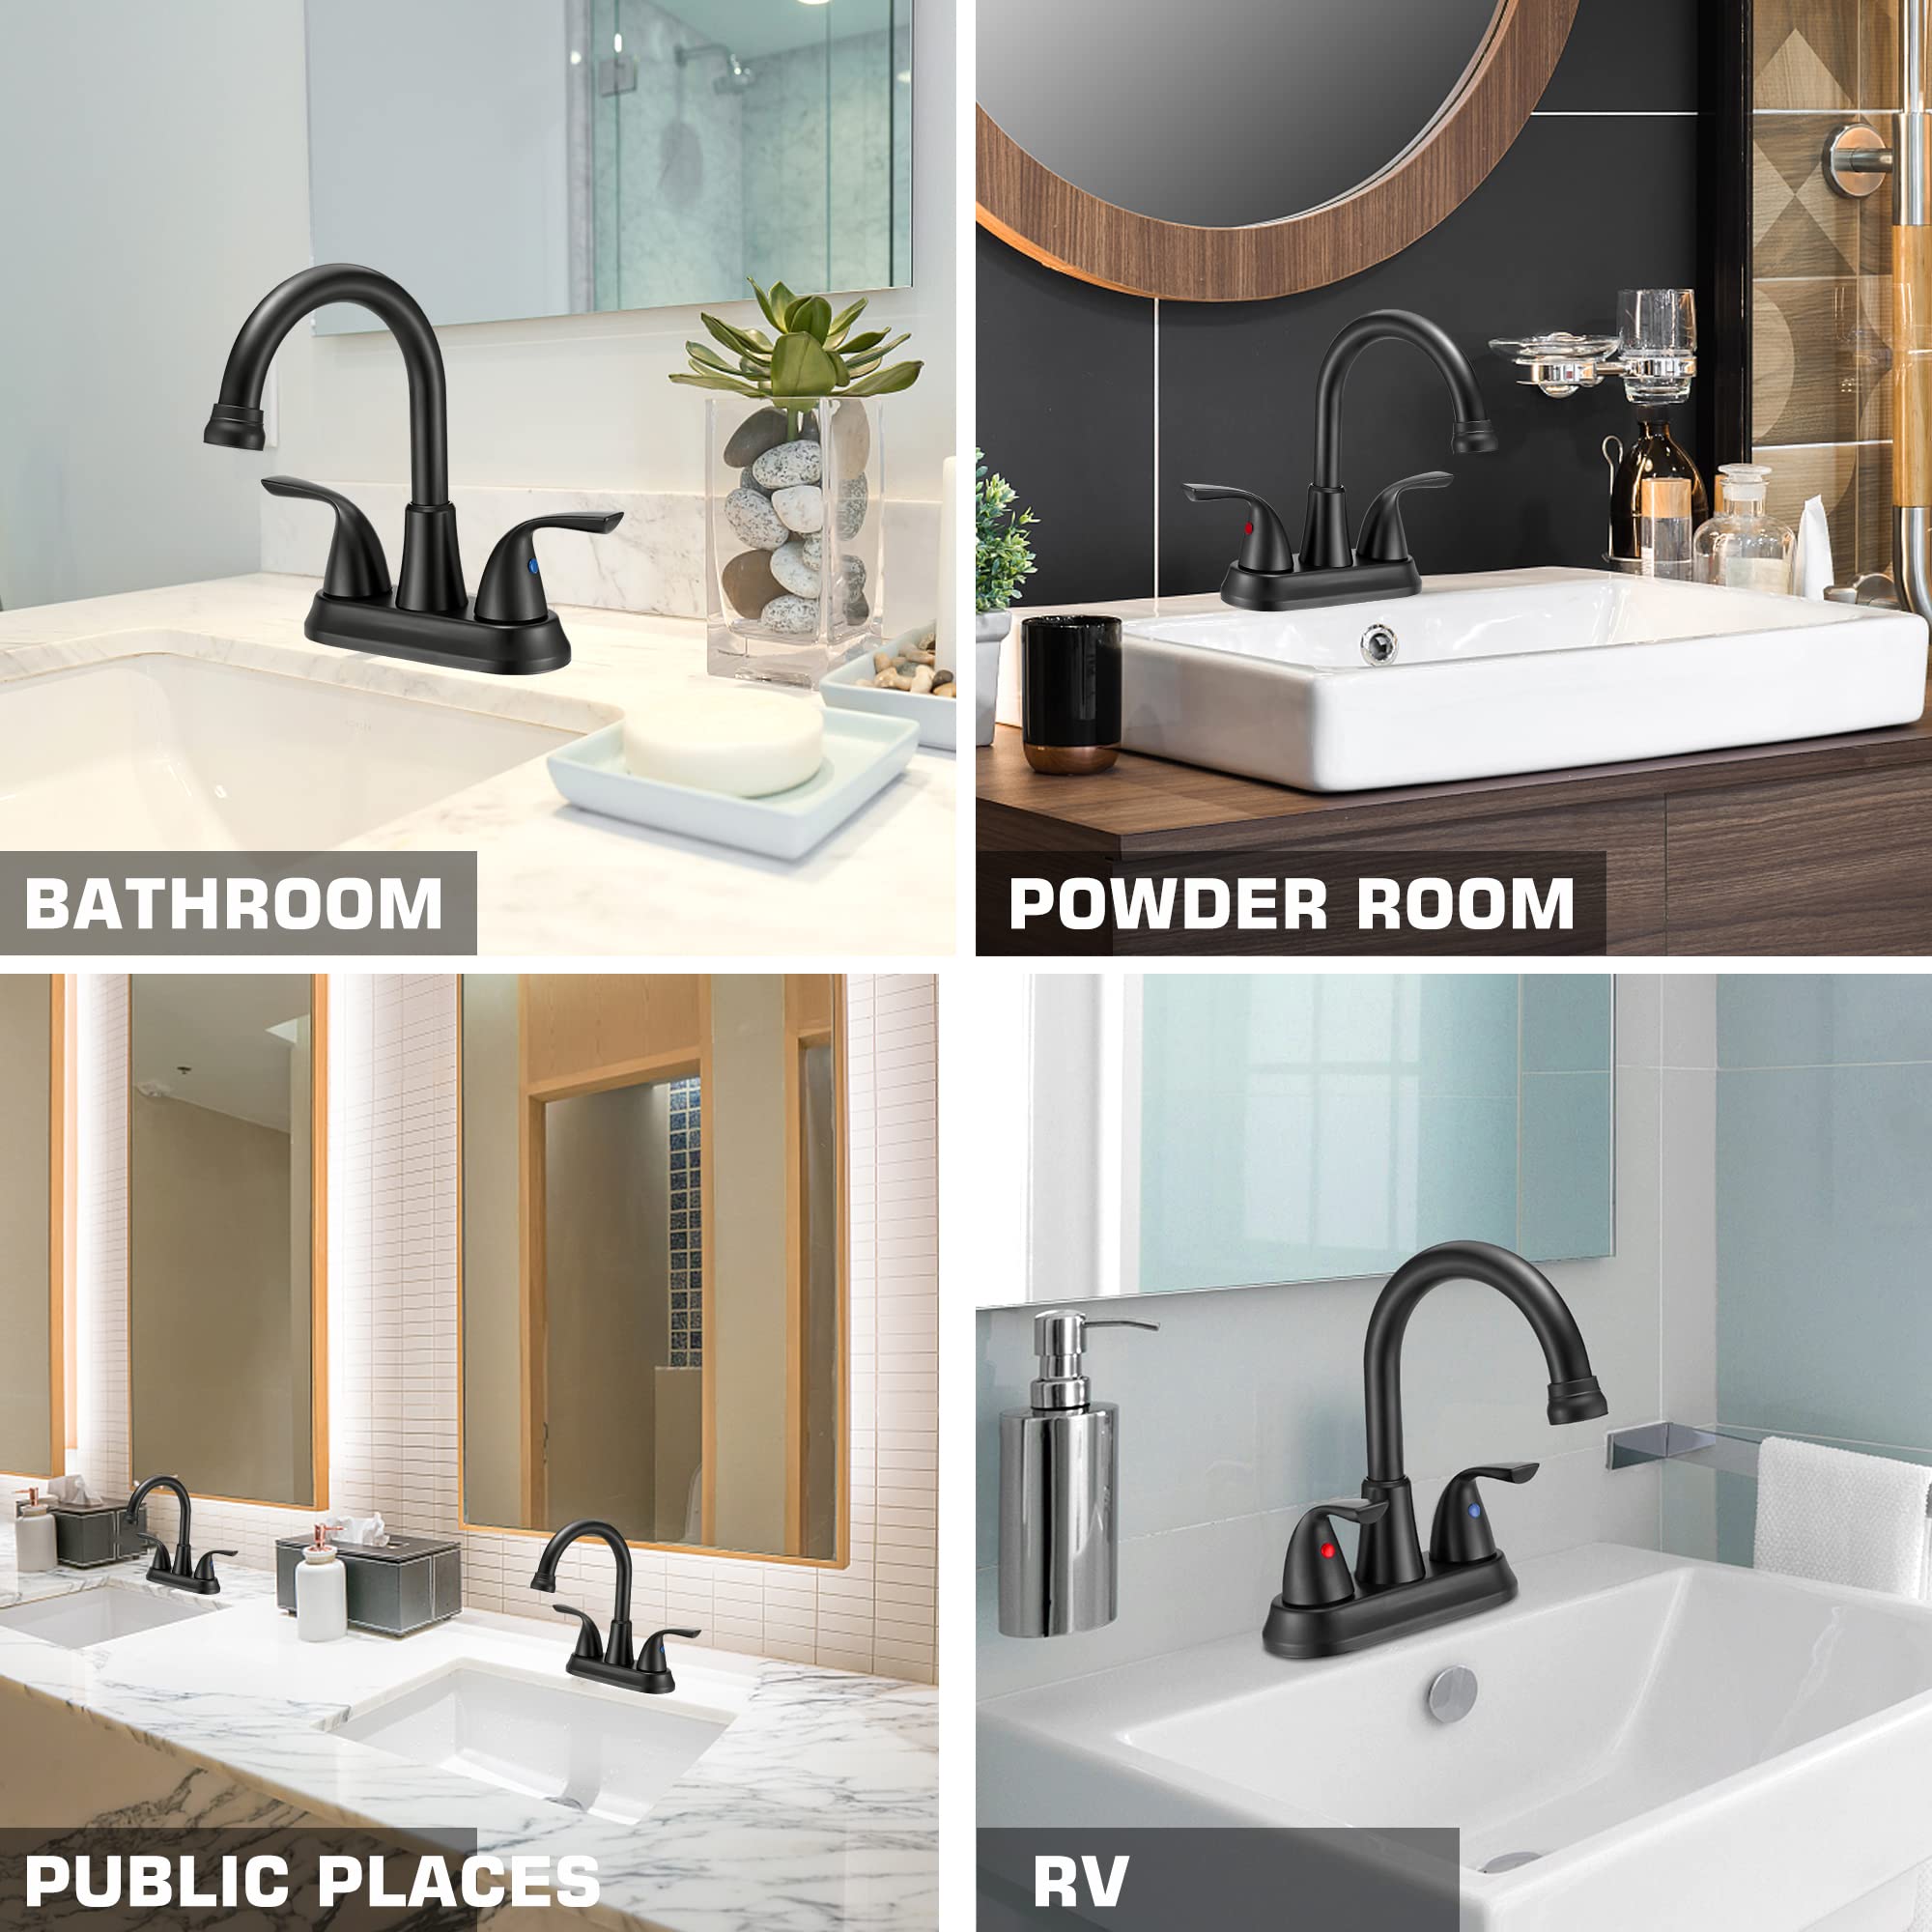 Bathroom Faucets, Faucet for Bathroom Sink 4 Inch 2 Handle Centerset, Bathroom Sink Faucet 3 Hole, Lead-Free, Matte Black Faucets for Bath Vanity Fixtures (Not Include Hot & Cold Water Lines)